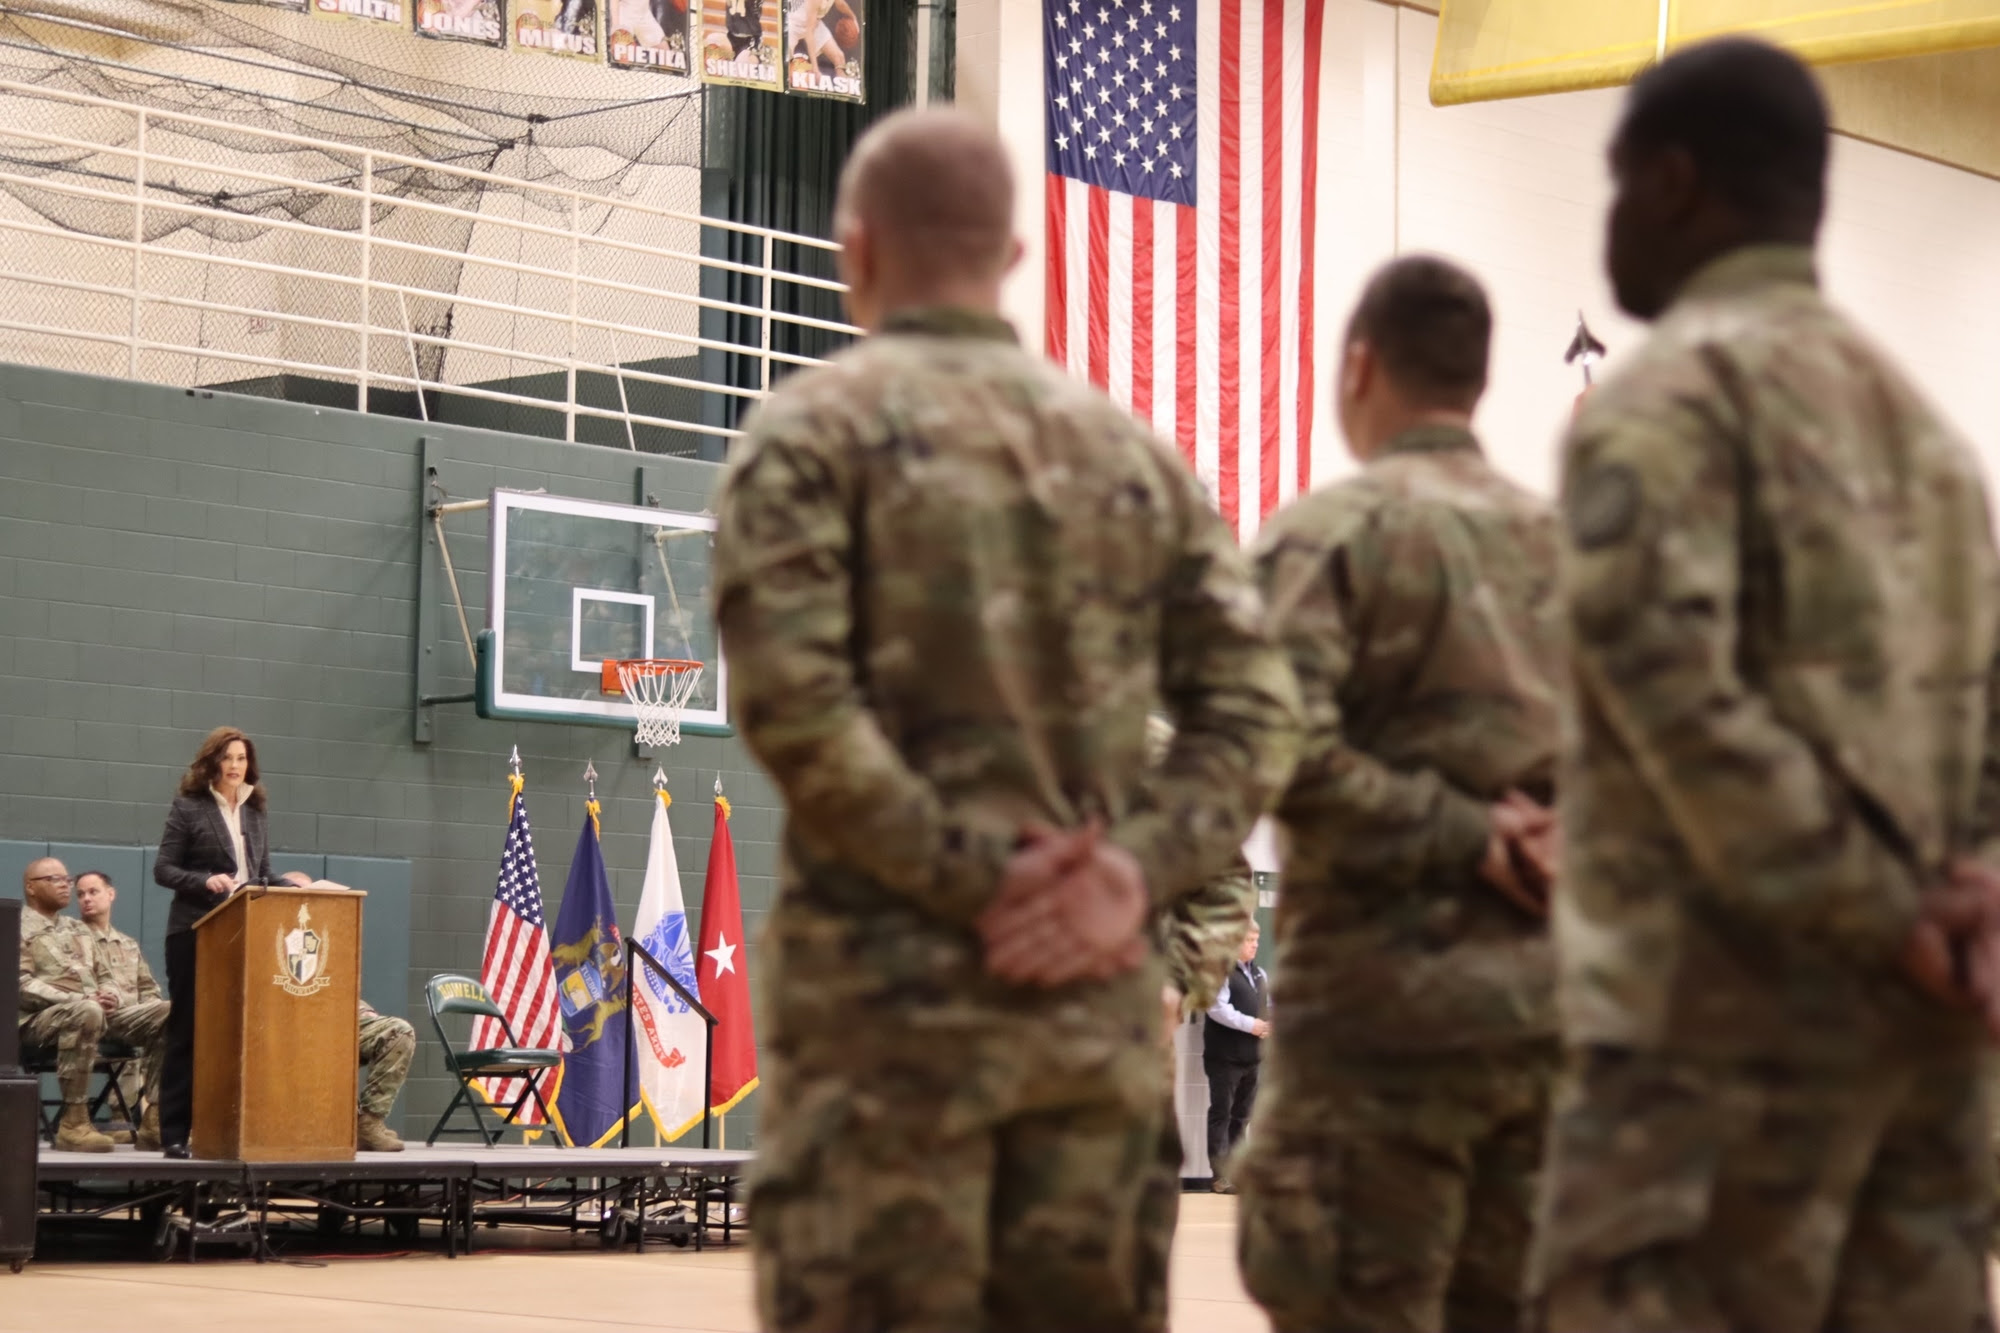 Gov. Whitmer speaks at podium during deployment ceremony at Howell High School